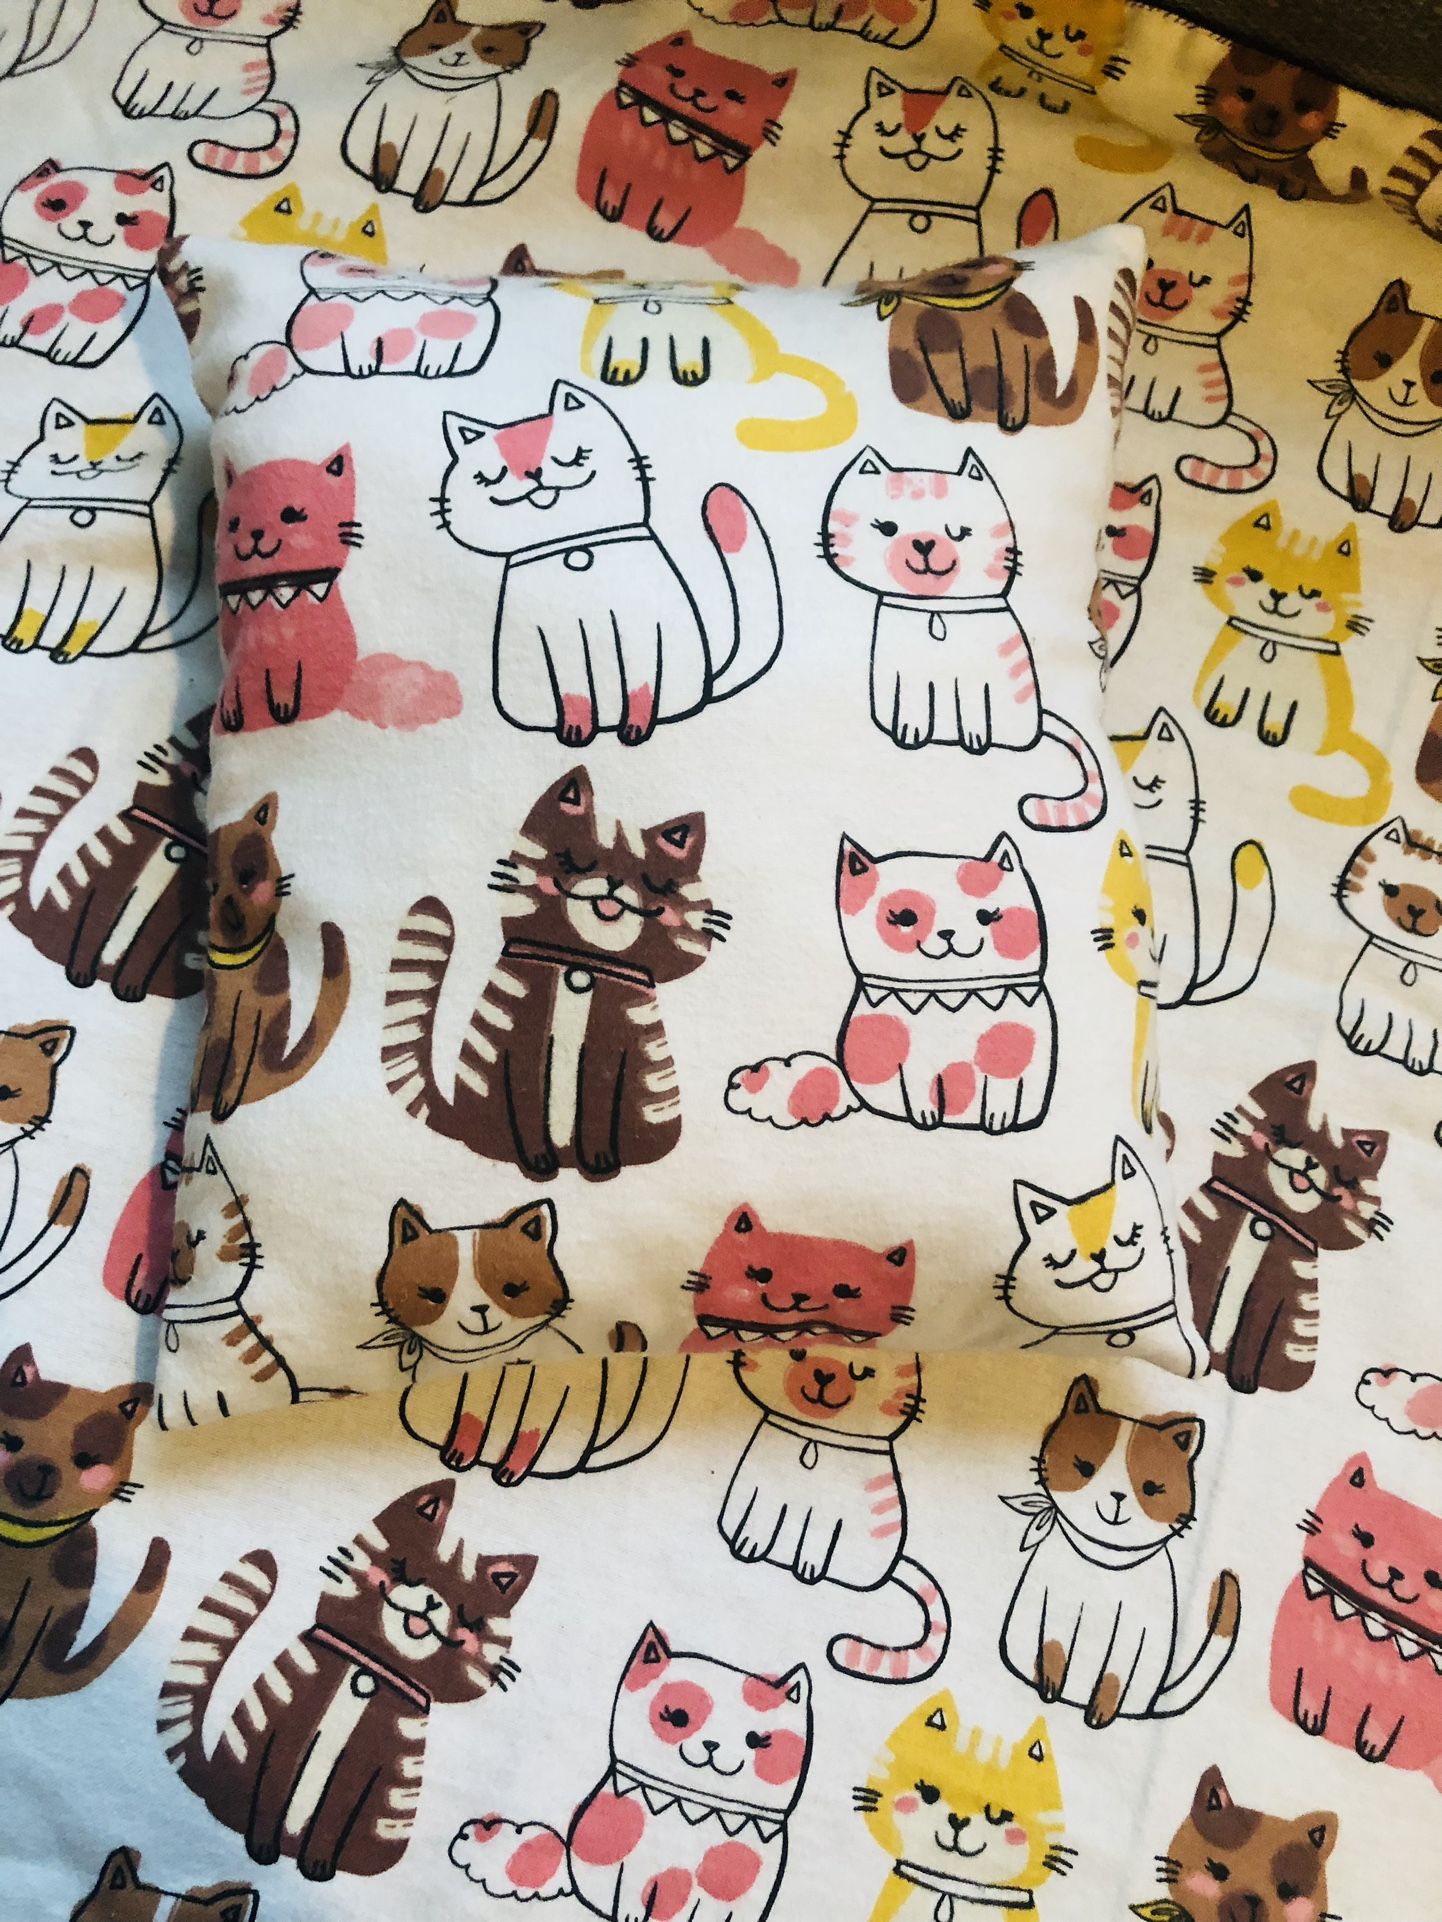 Large Adorable Kitty Blanket and Pillow To Match 23”x31-1/2” Pillow 9”x11”